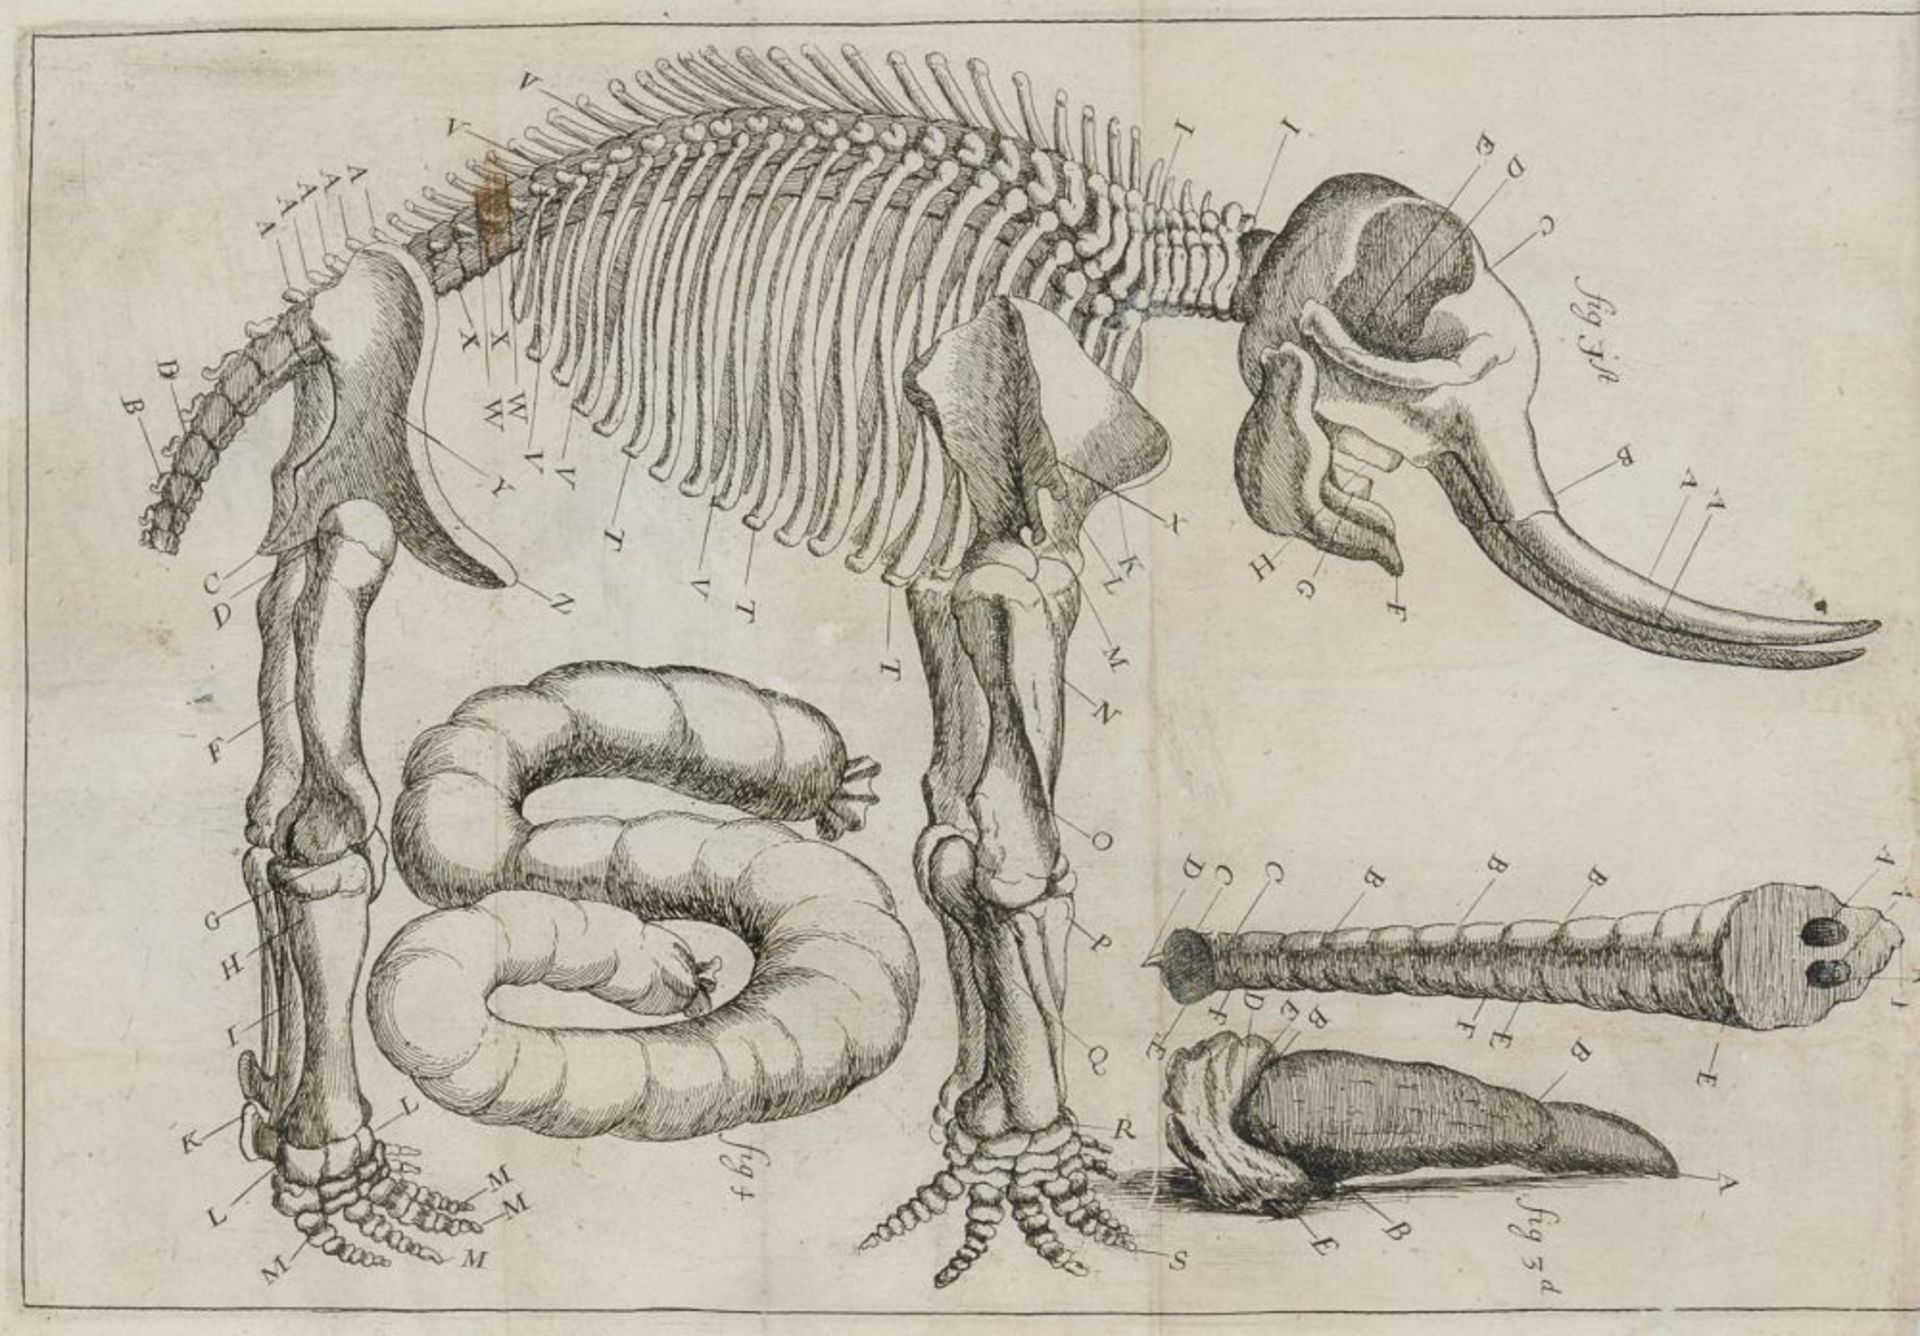 Biologie - Zoologie - - Mullen (oder: Molines), Allen. An anatomical account of the elephant